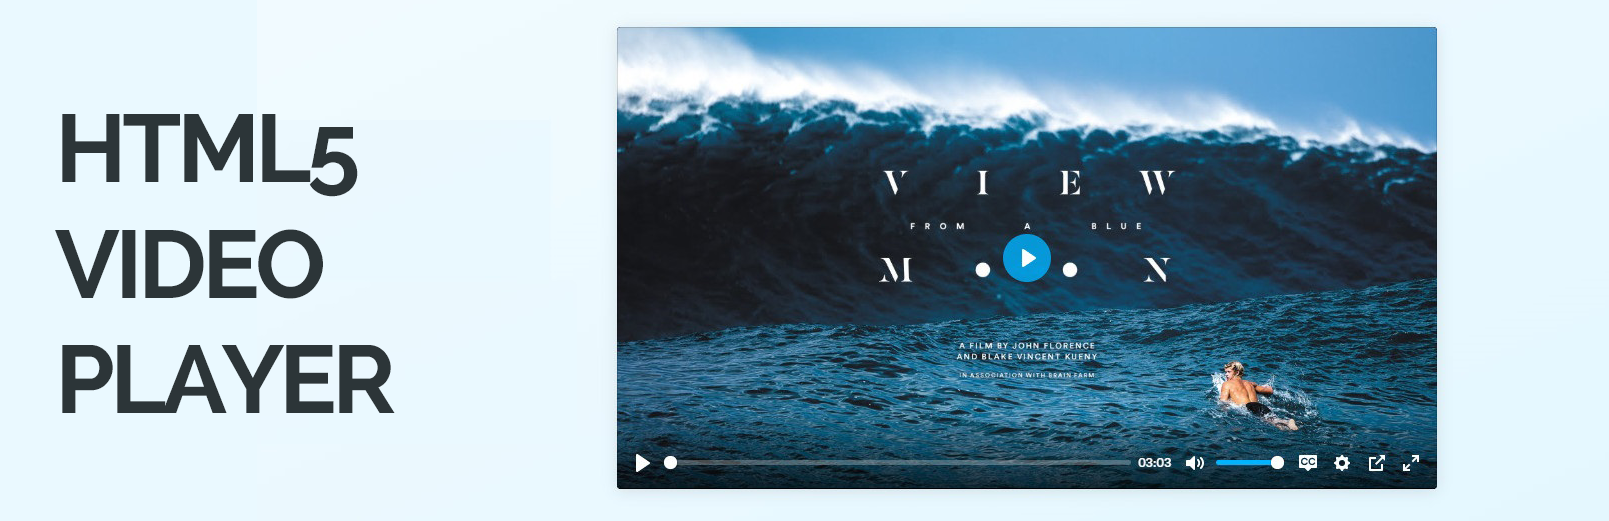 HTML5 Video Player — mp4 Video Player Plugin and Block